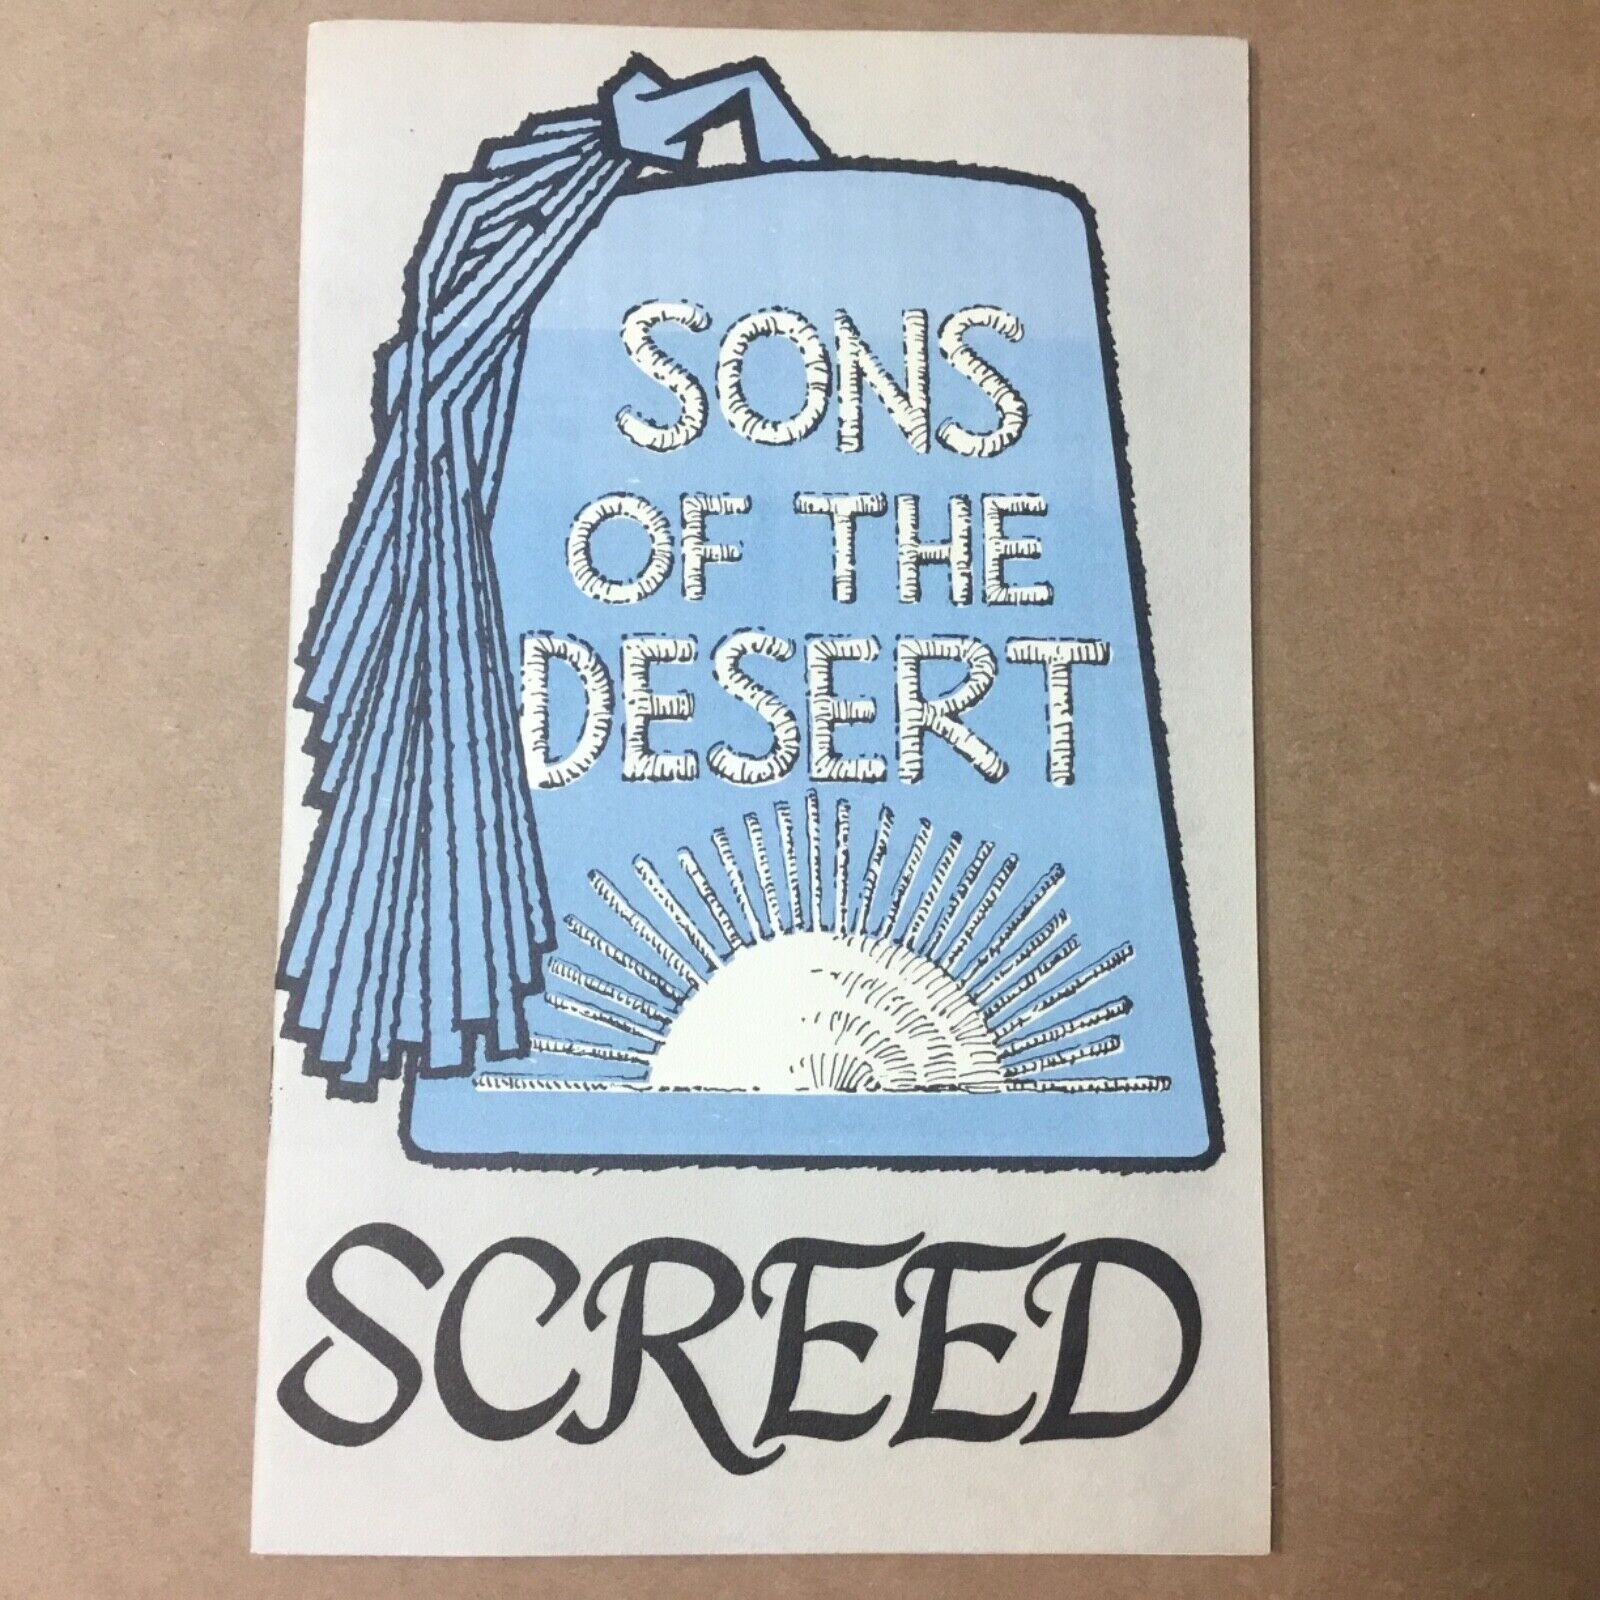 SONS OF THE DESERT “SCREED” booklet defining the SOCIETY & RULES OF ORDER AK498